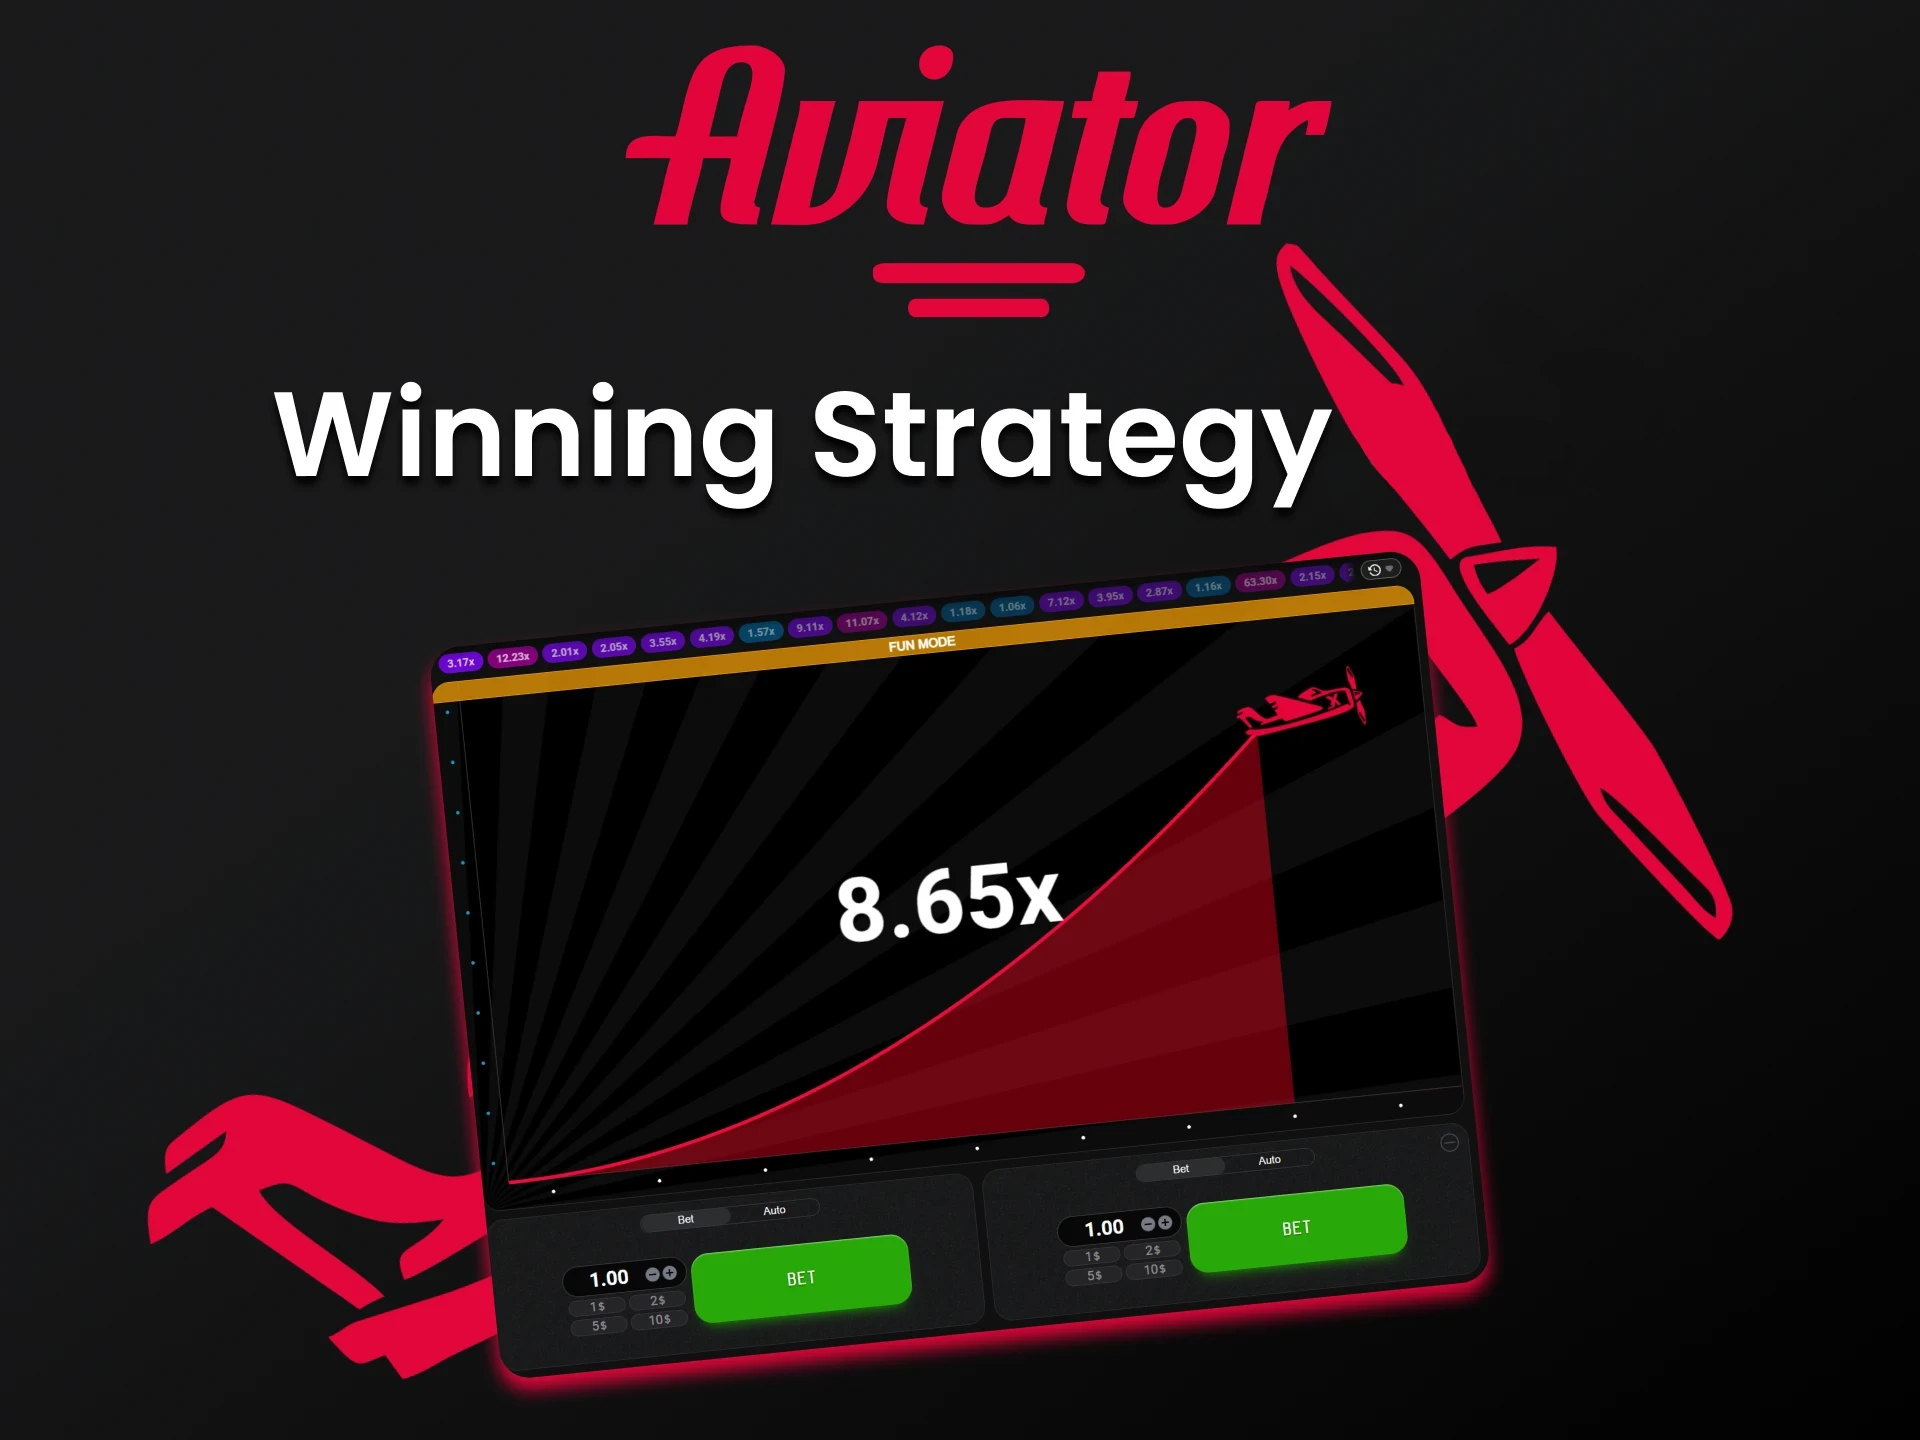 Use strategies that will bring you victory in the Aviator money game.